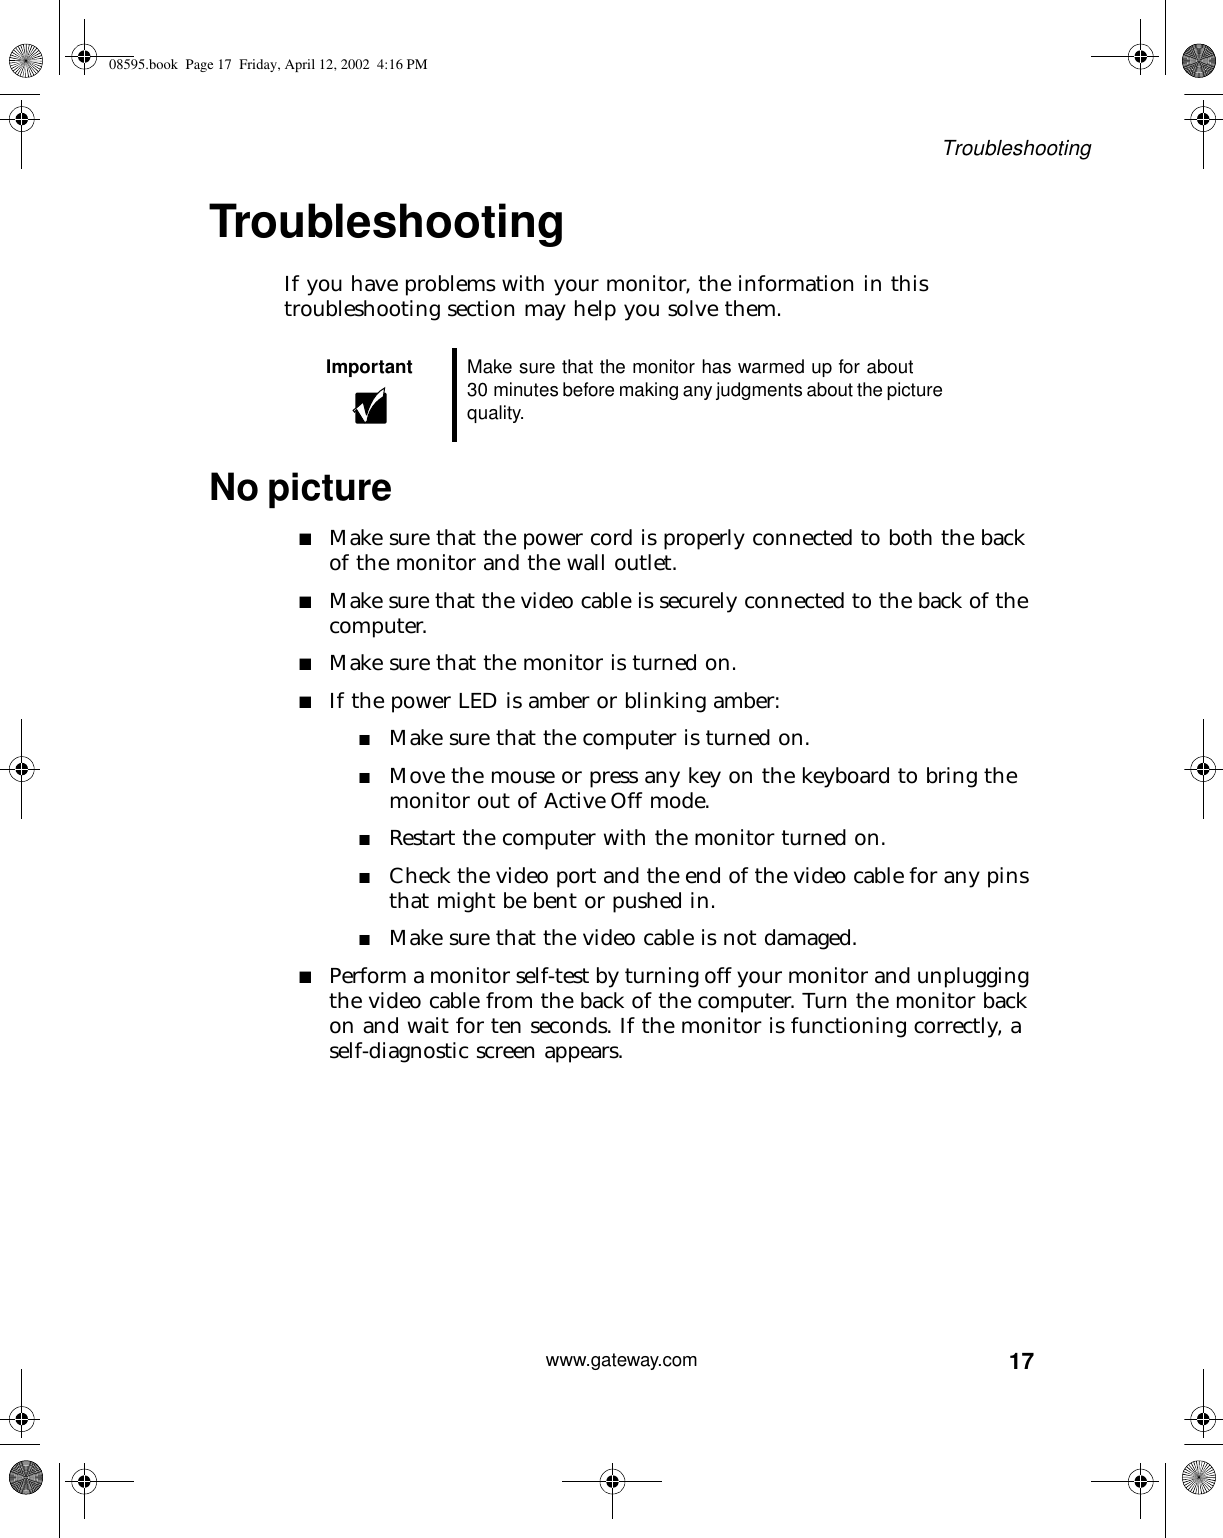 17Troubleshootingwww.gateway.comTroubleshootingIf you have problems with your monitor, the information in this troubleshooting section may help you solve them.No picture■Make sure that the power cord is properly connected to both the back of the monitor and the wall outlet.■Make sure that the video cable is securely connected to the back of the computer.■Make sure that the monitor is turned on.■If the power LED is amber or blinking amber:■Make sure that the computer is turned on.■Move the mouse or press any key on the keyboard to bring the monitor out of Active Off mode.■Restart the computer with the monitor turned on.■Check the video port and the end of the video cable for any pins that might be bent or pushed in.■Make sure that the video cable is not damaged.■Perform a monitor self-test by turning off your monitor and unplugging the video cable from the back of the computer. Turn the monitor back on and wait for ten seconds. If the monitor is functioning correctly, a self-diagnostic screen appears.Important Make sure that the monitor has warmed up for about 30 minutes before making any judgments about the picture quality.08595.book  Page 17  Friday, April 12, 2002  4:16 PM